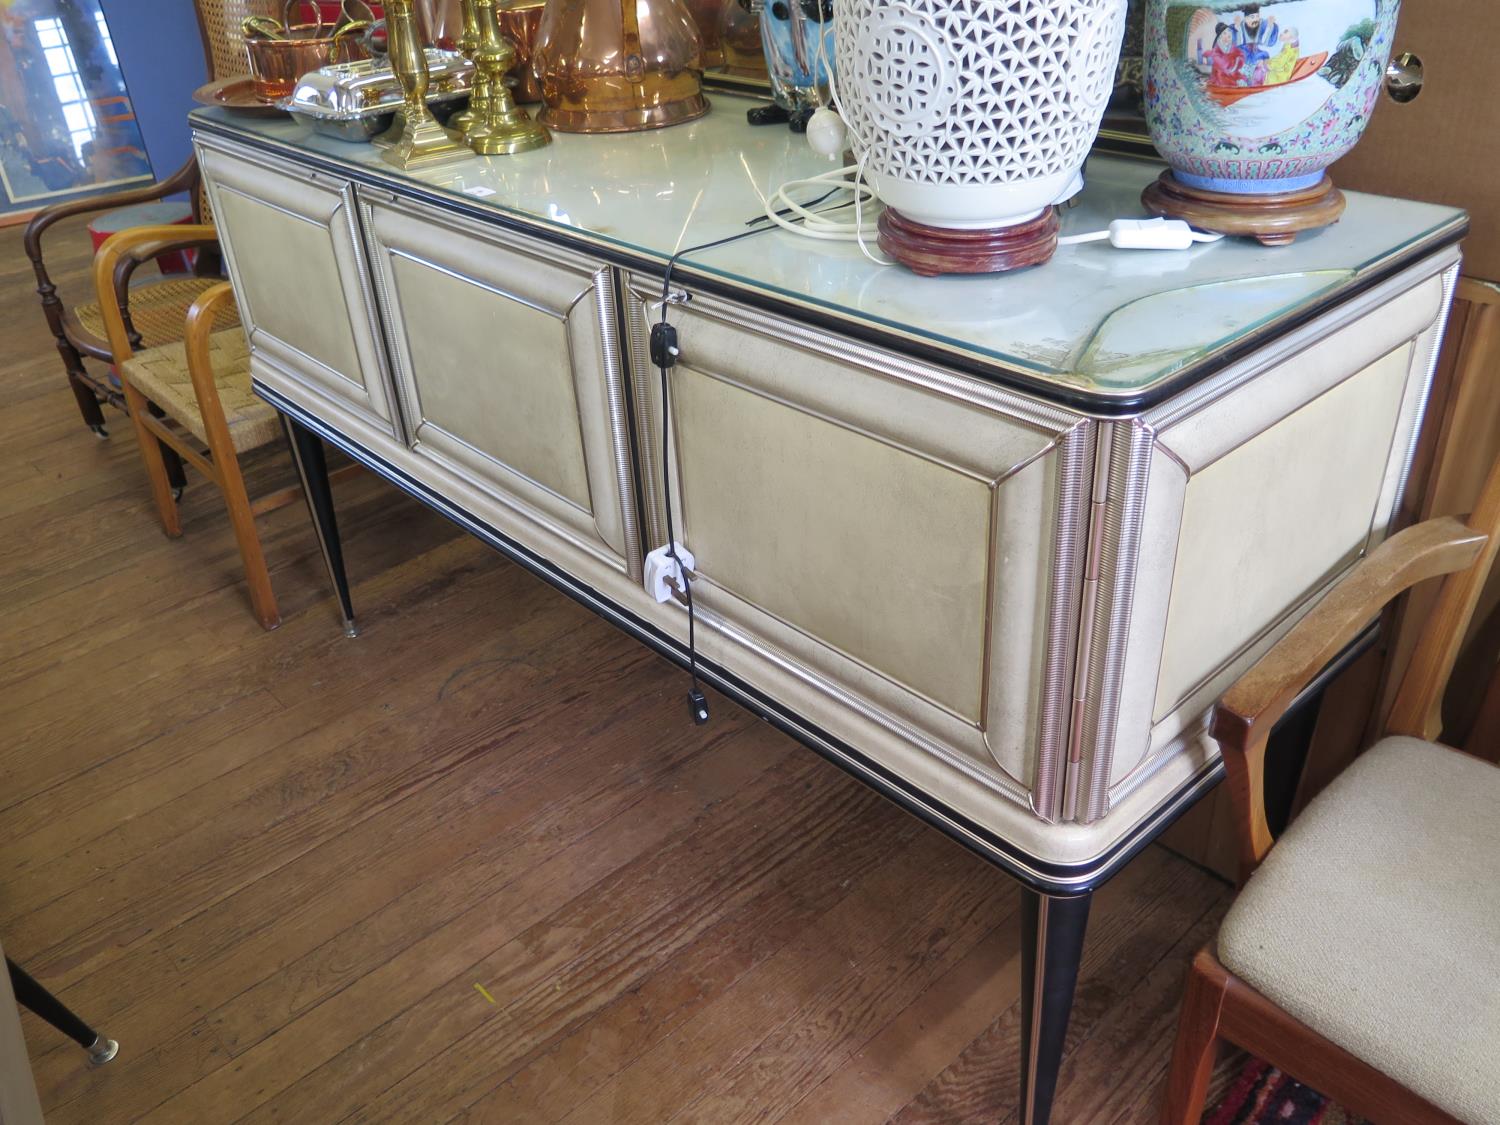 A cream and black faux leather dining room suite by Umberto Mascagni, the sideboard with mirrored